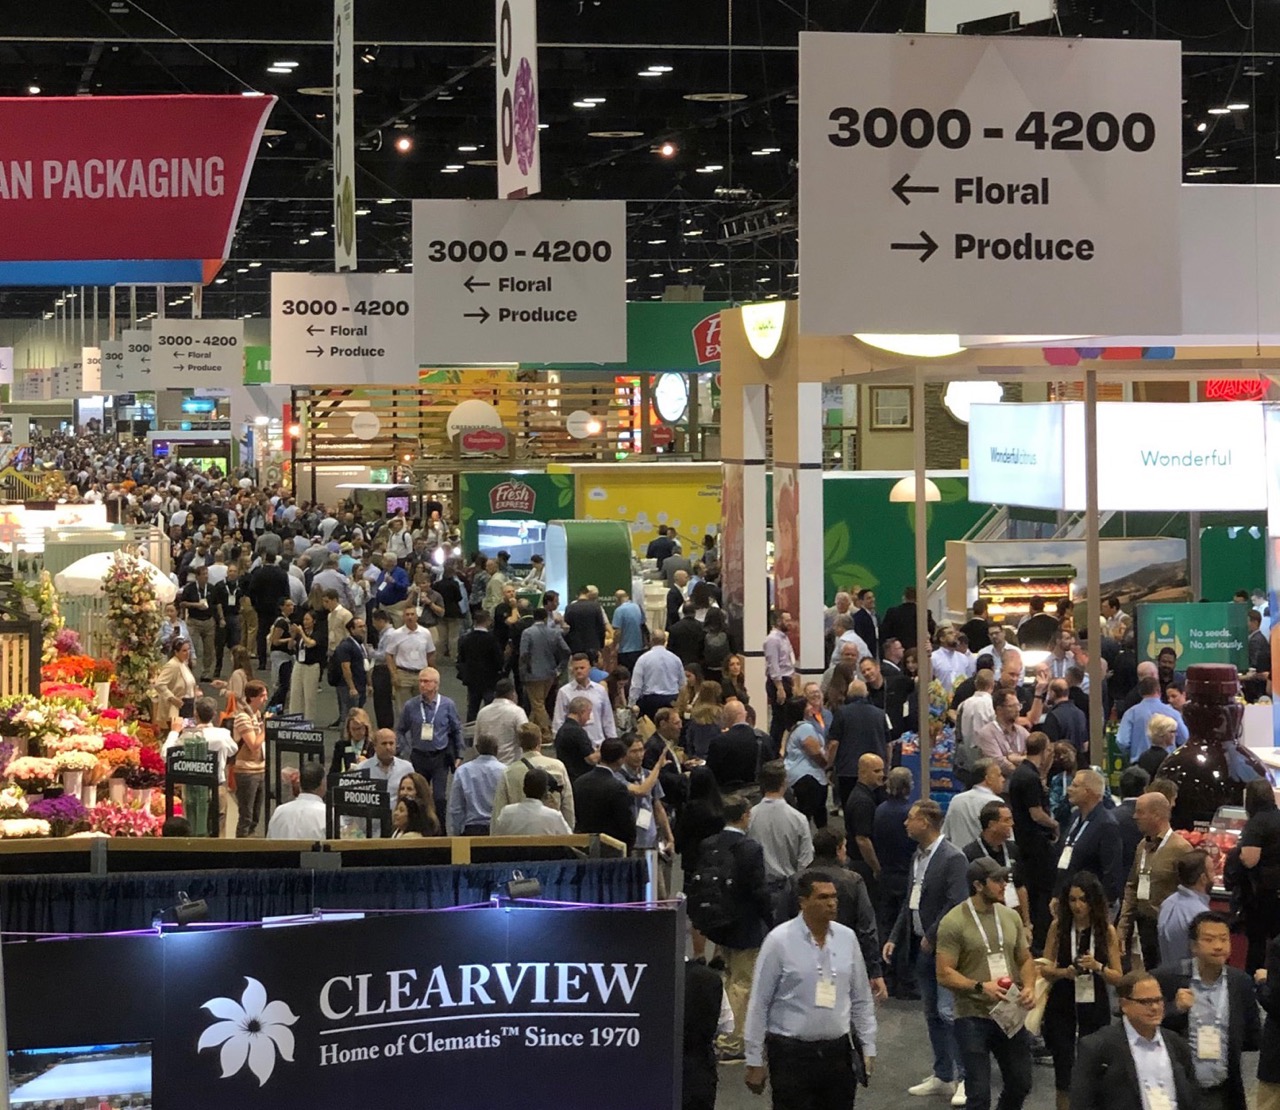 [Press Release] Global Produce and Floral Show Ignites Industry in